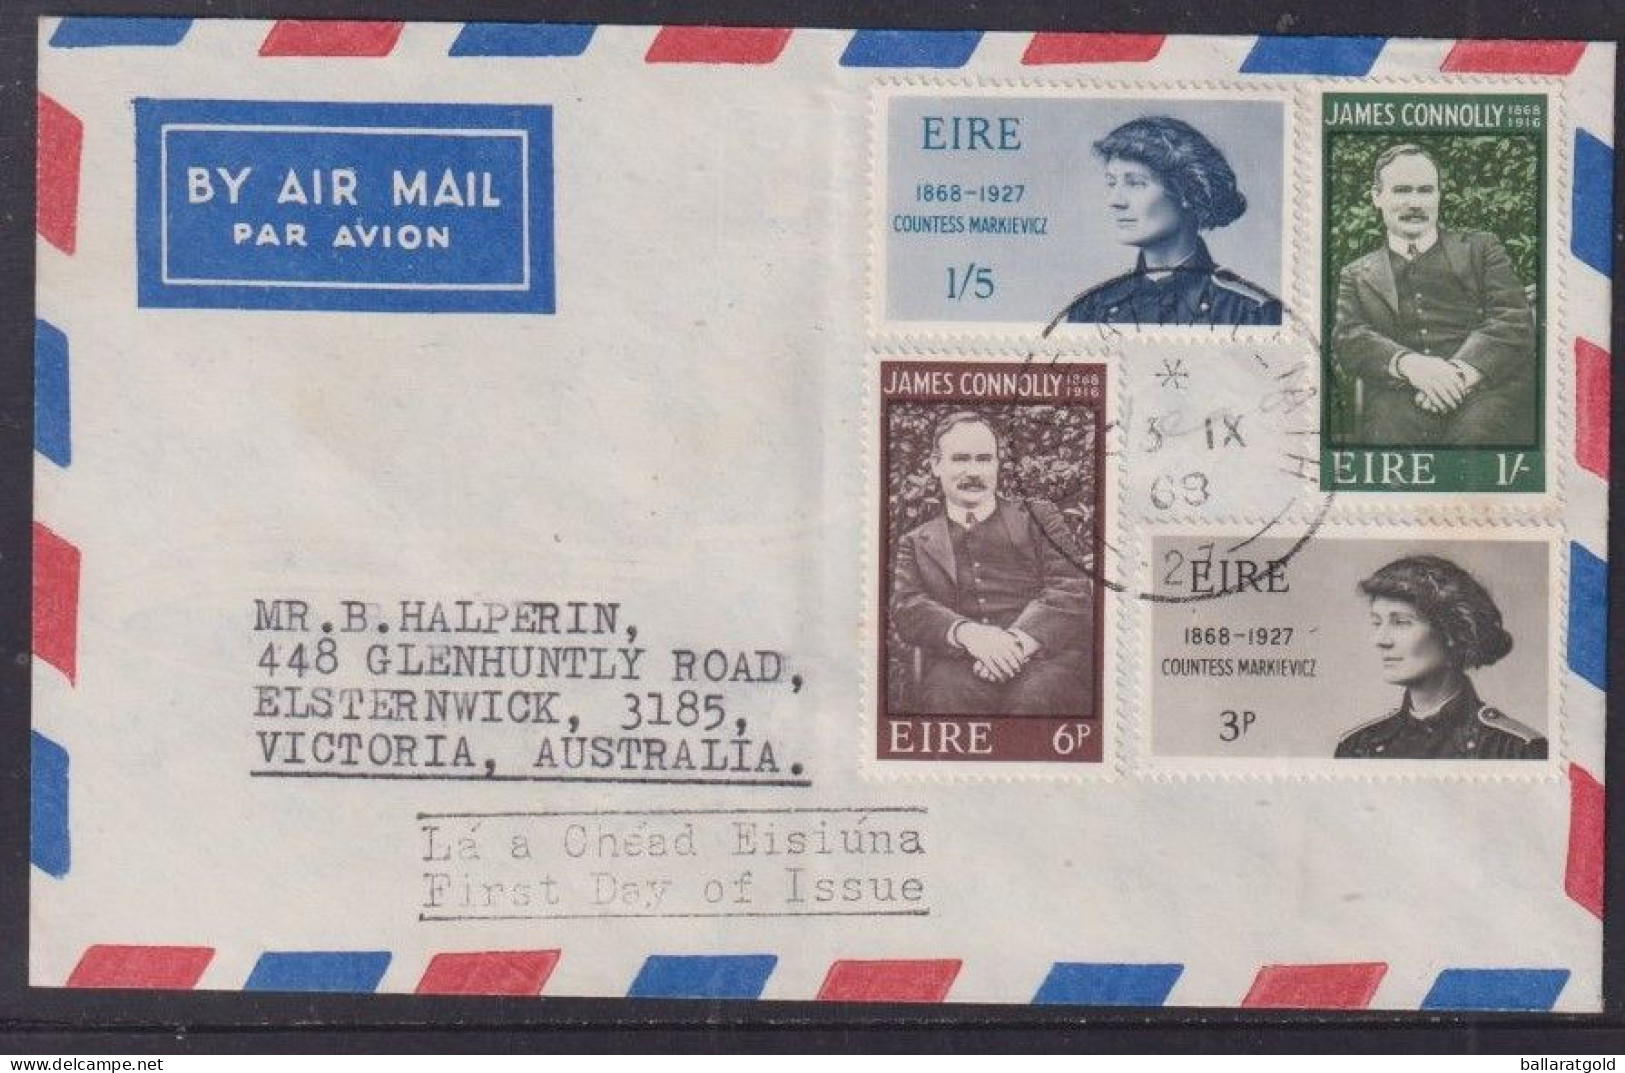 Ireland 1968 Airletter To Elsternwick - Covers & Documents